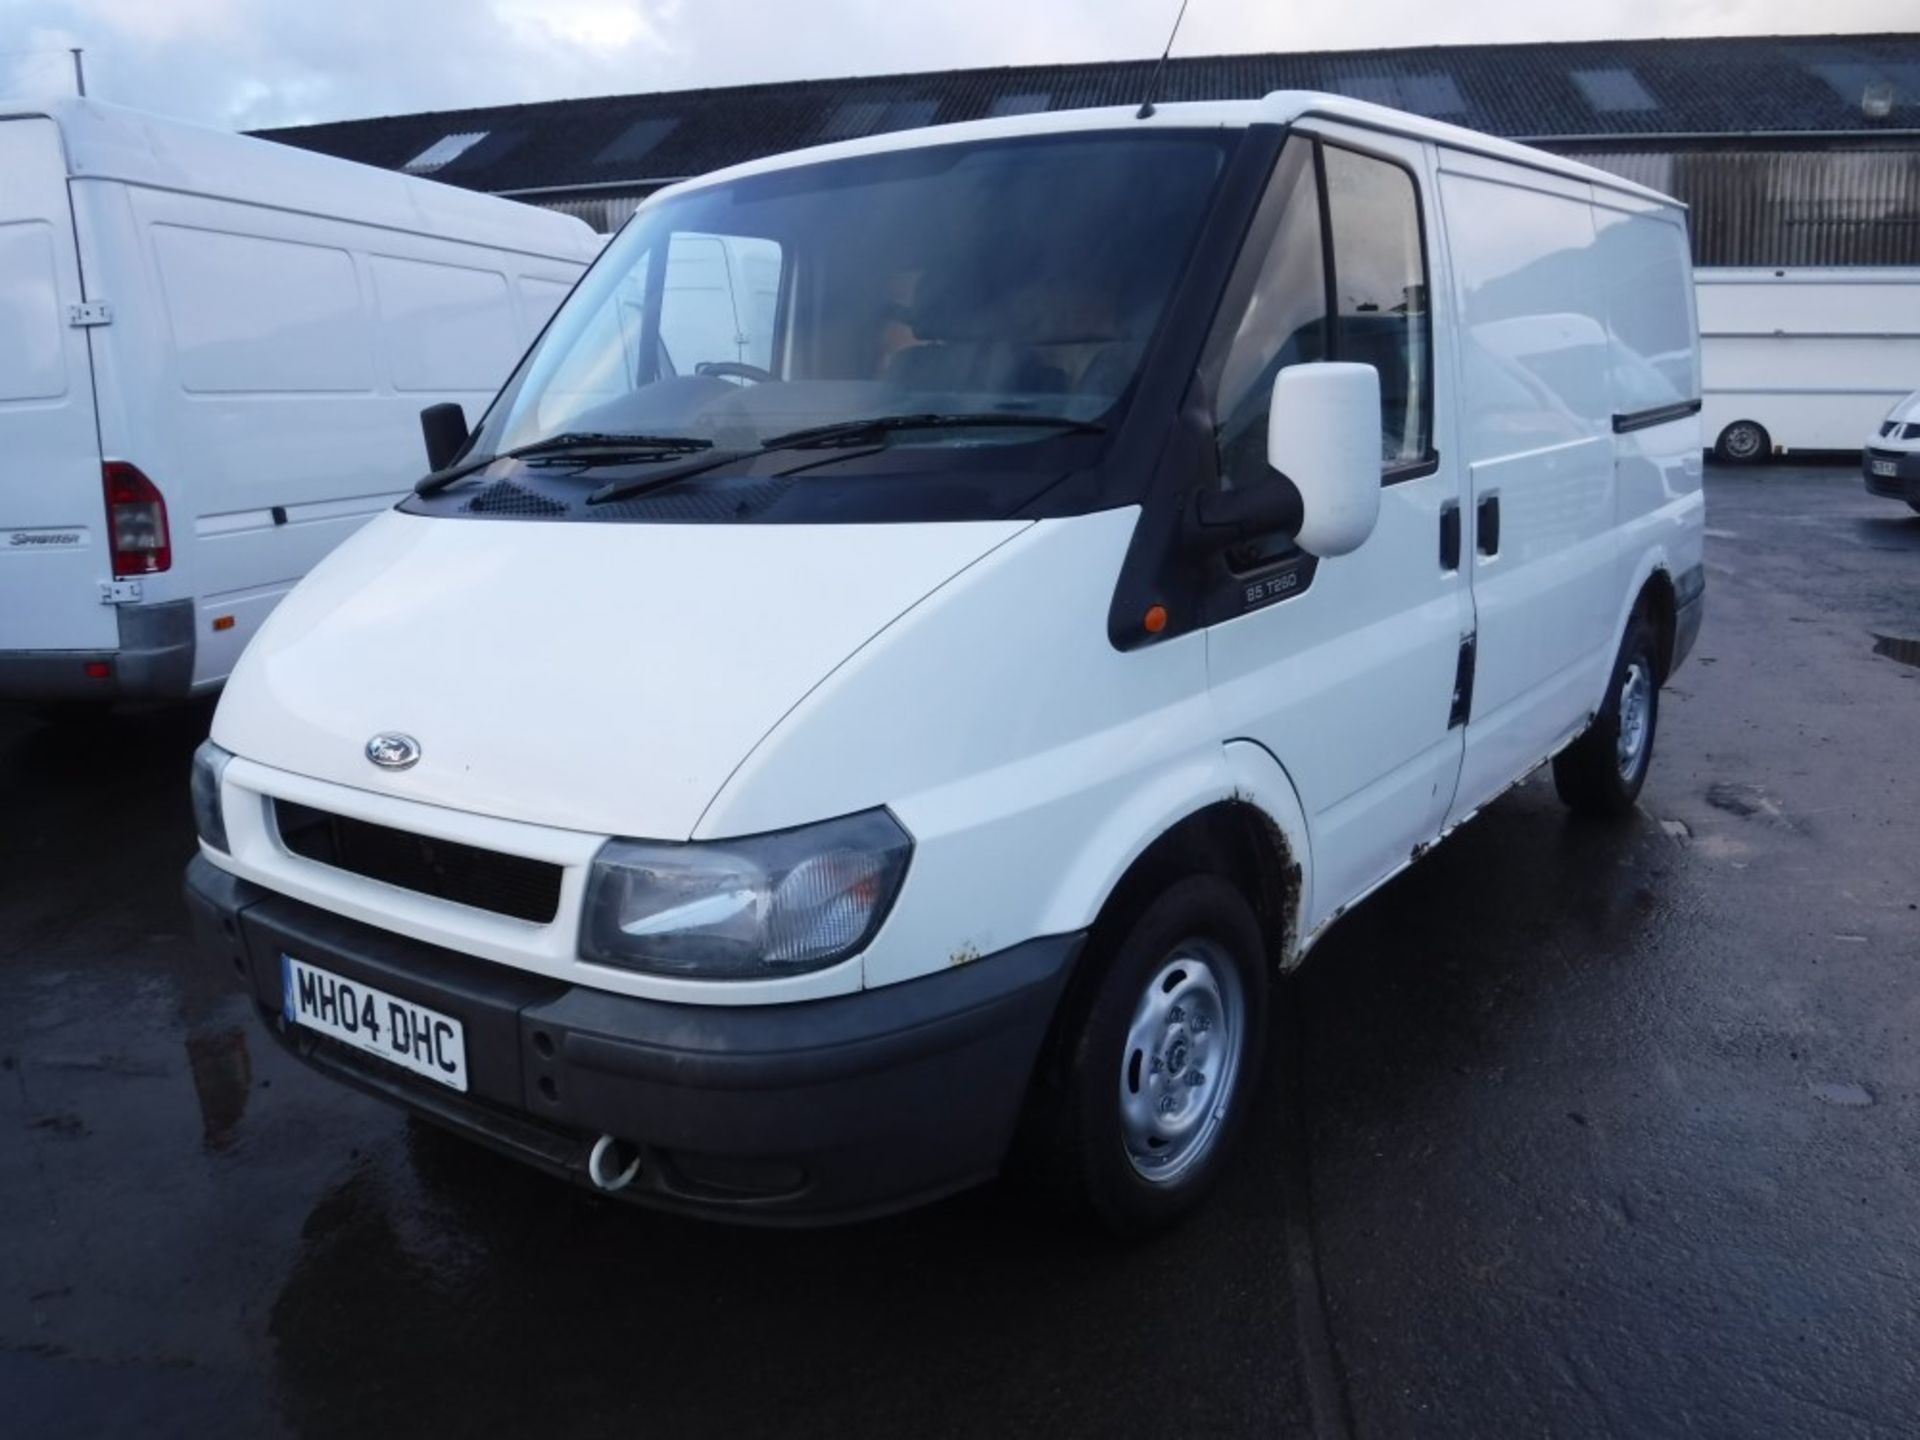 04 reg FORD TRANSIT 260 SWB, 1ST REG 08/04, 101391M NOT WARRANTED, V5 HERE, 4 FORMER KEEPERS [NO - Image 2 of 5